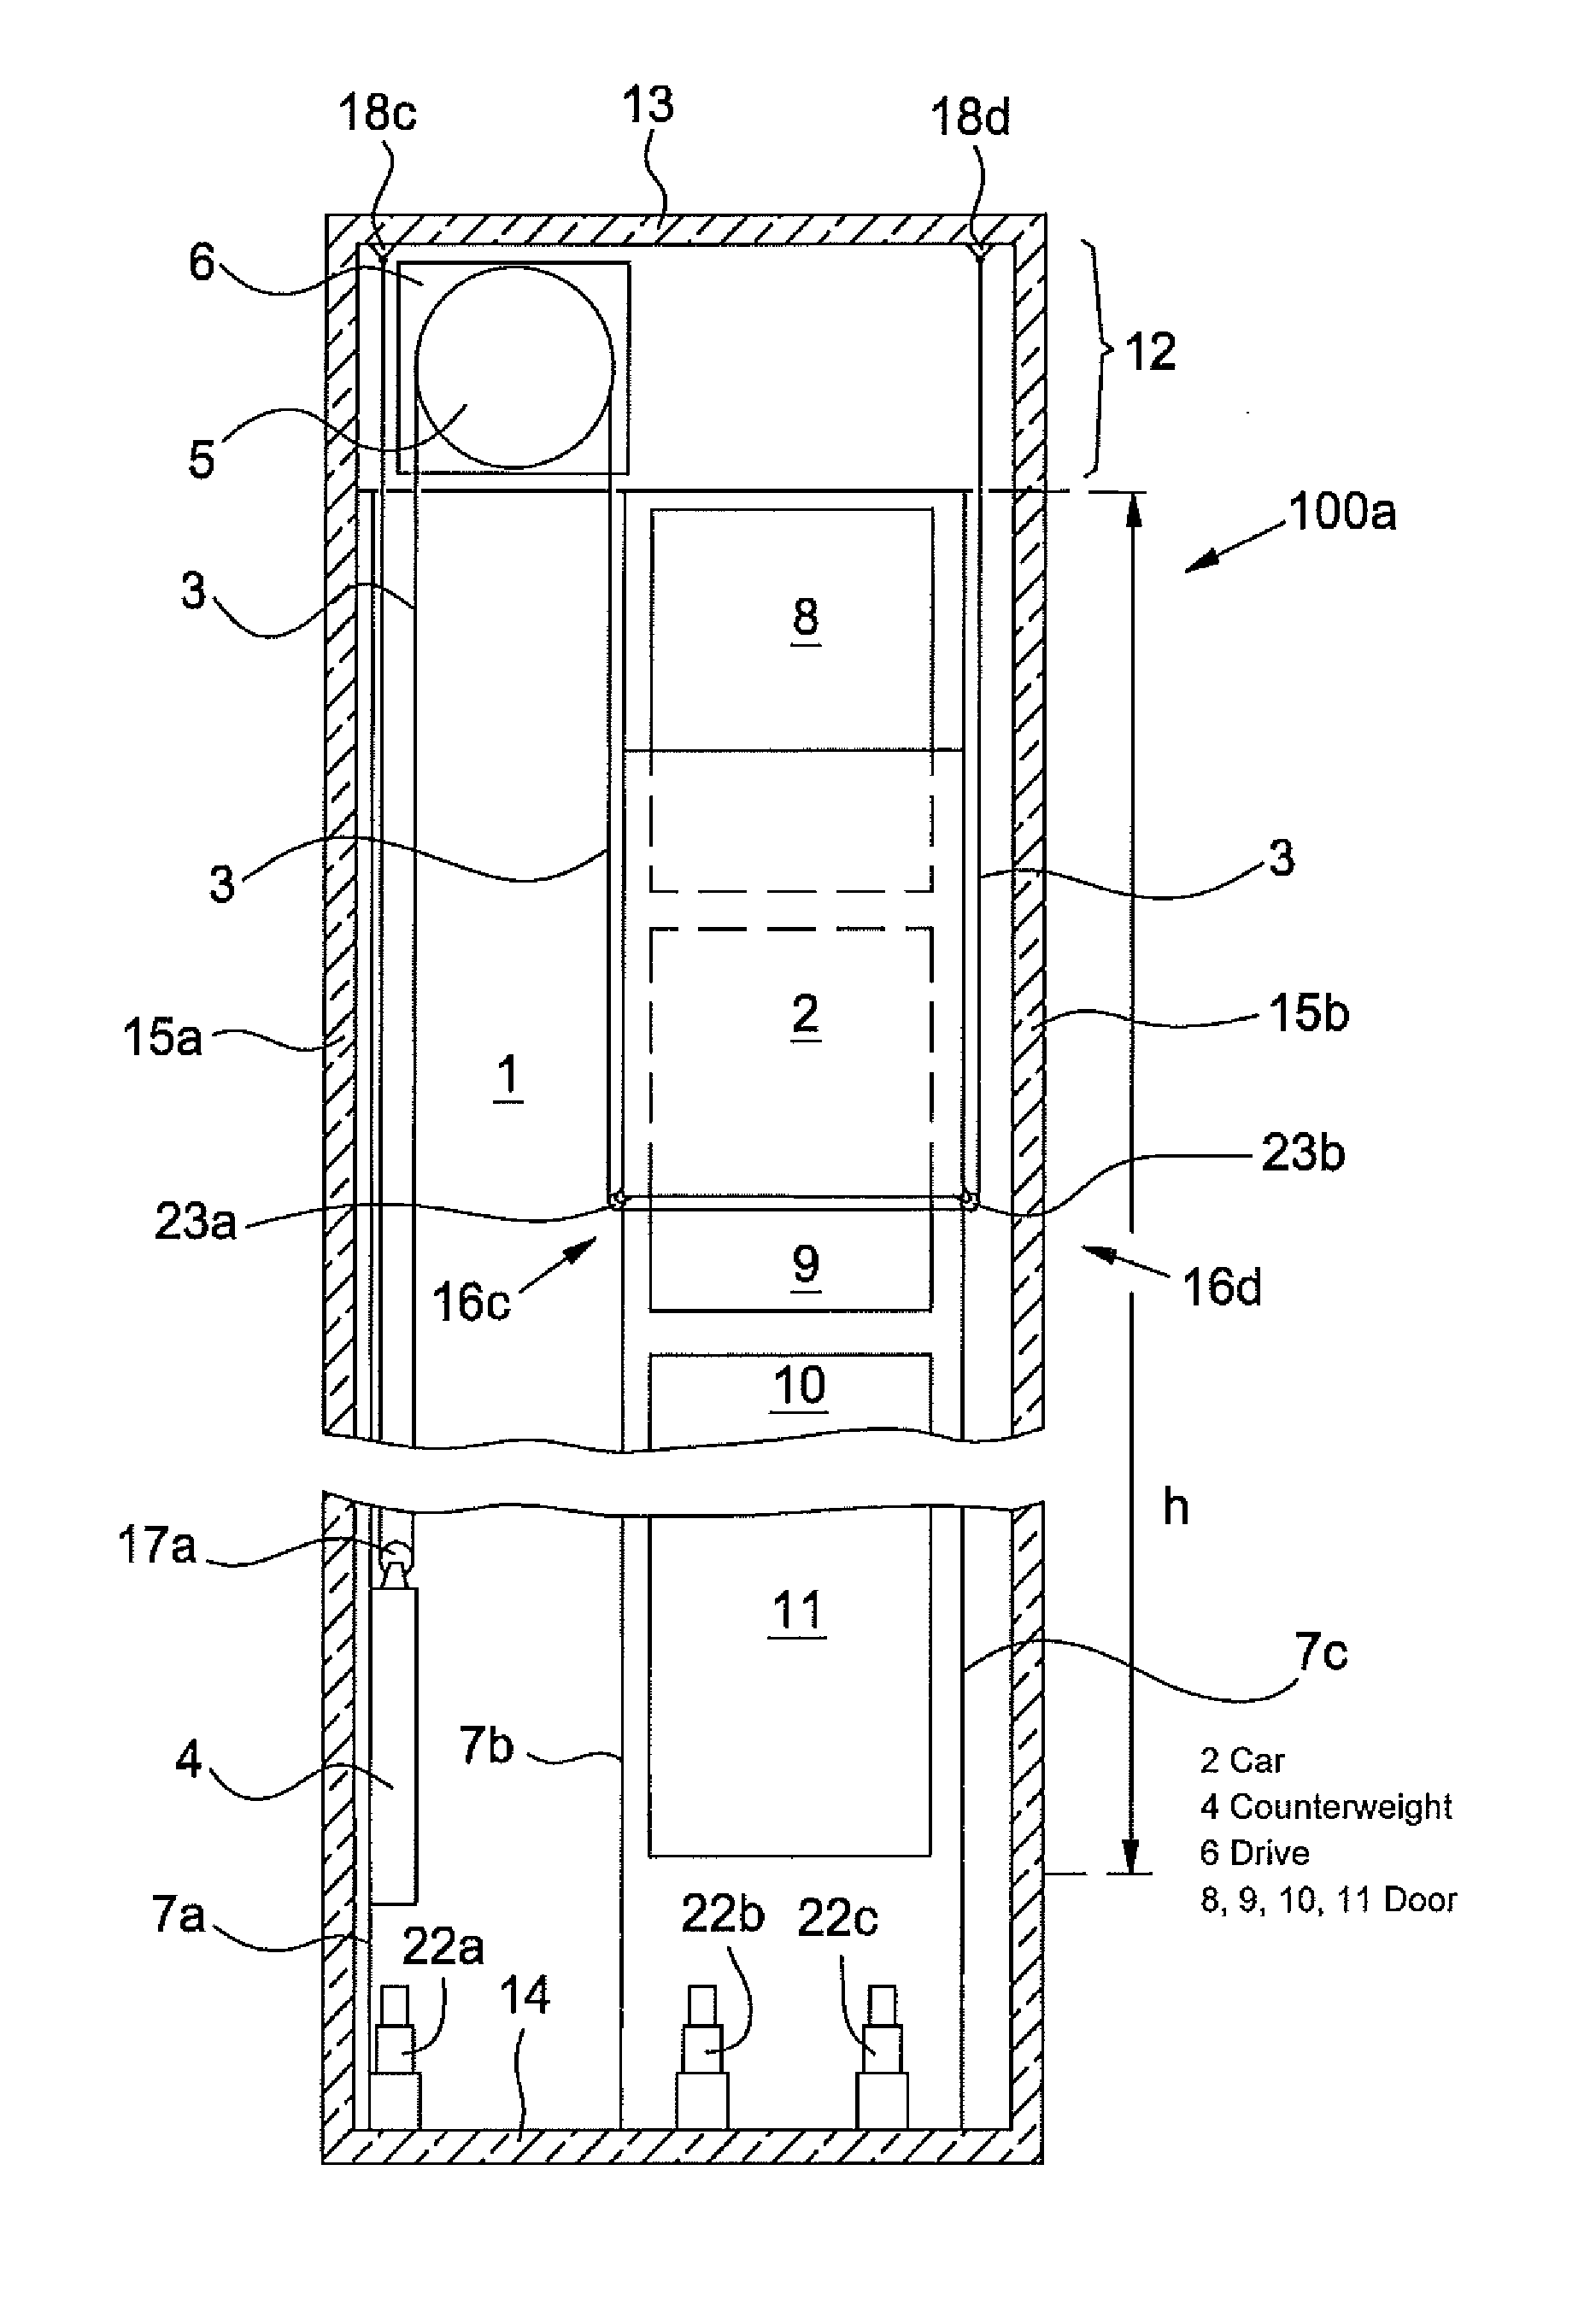 Operating state monitoring of support apparatus of an elevator system